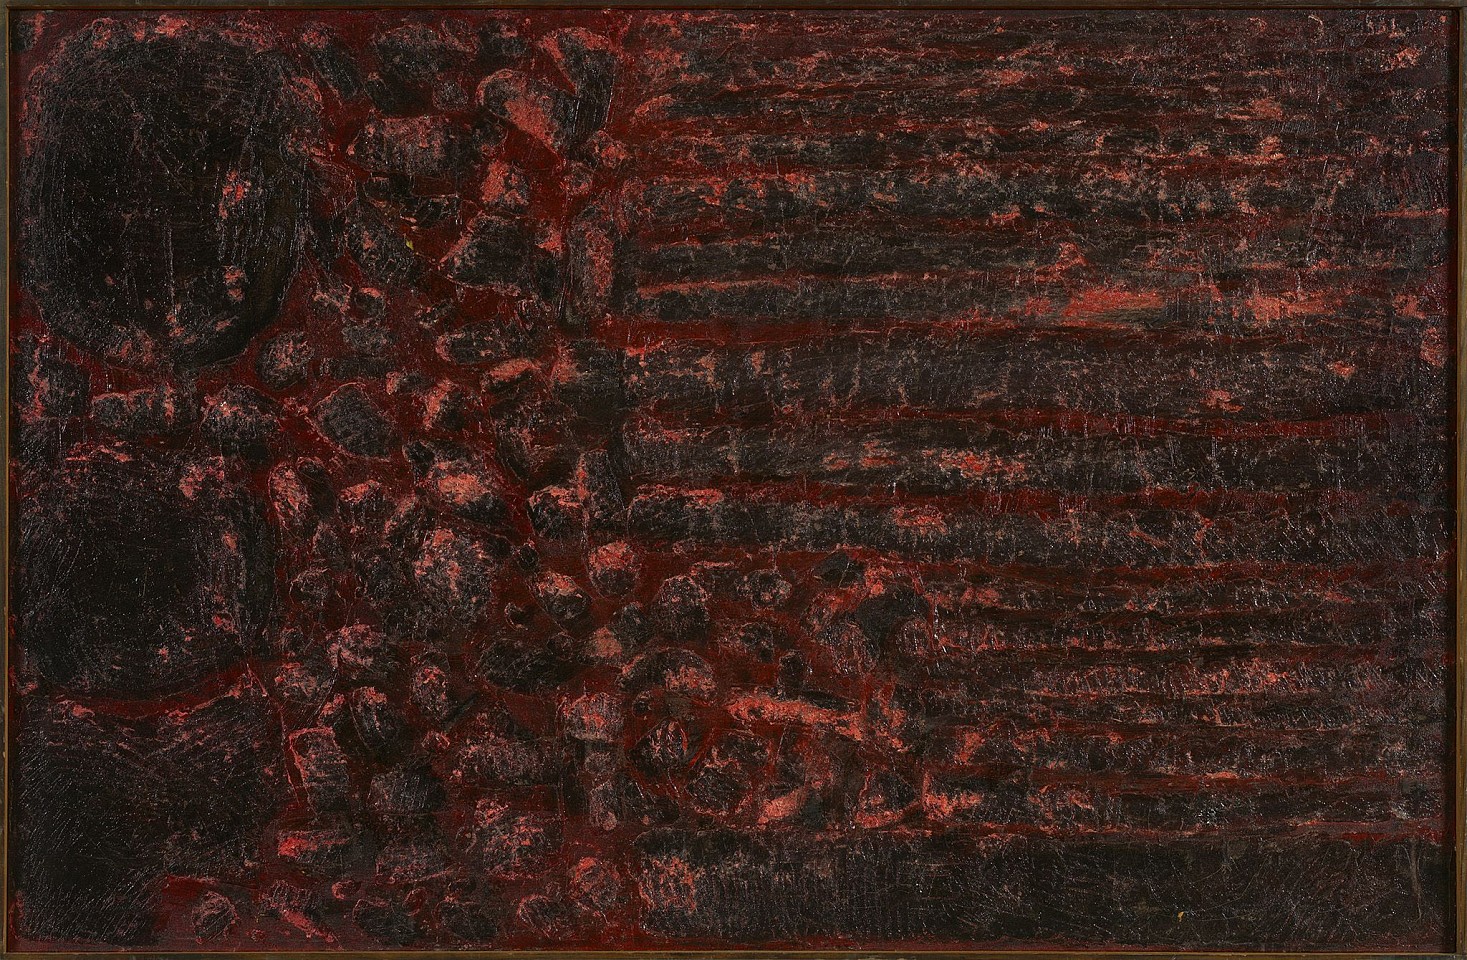 Ruth Wall, Untitled, 1950
Oil on canvas, 37 7/8 x 58 in. (96.2 x 147.3 cm)
RWAL-00001